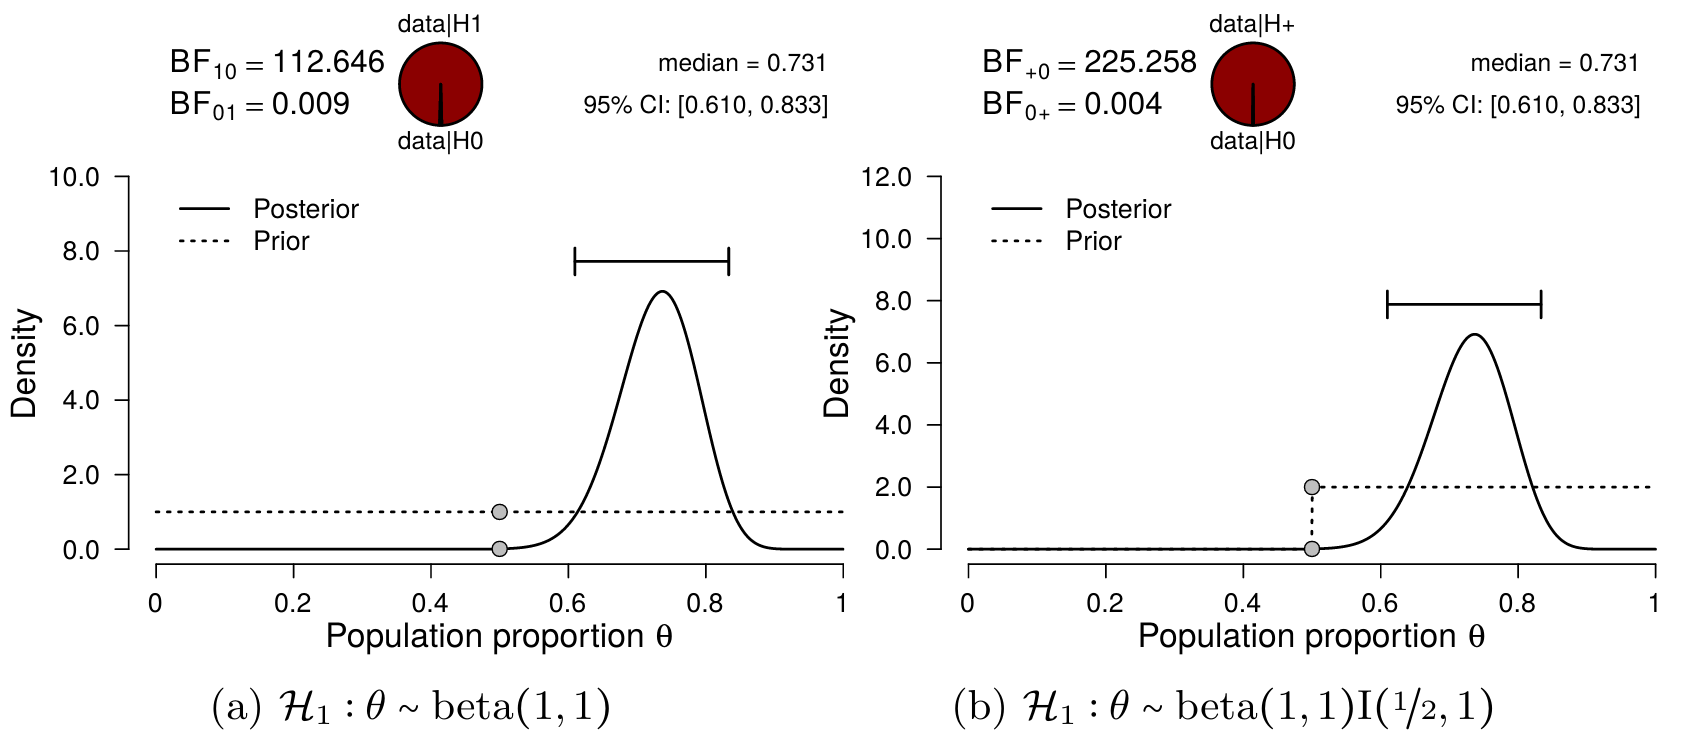 Bayesian binomial test for theta. The probability wheel at the top illustrates the ratio of the evidence in favor of the two hypotheses. The two gray dots indicate the Savage-Dickey density ratio. The median and the 95 percent credible interval of the posterior distribution are shown in the top right corner. The left panel shows the two-sided test and the right panel shows the one-sided test.